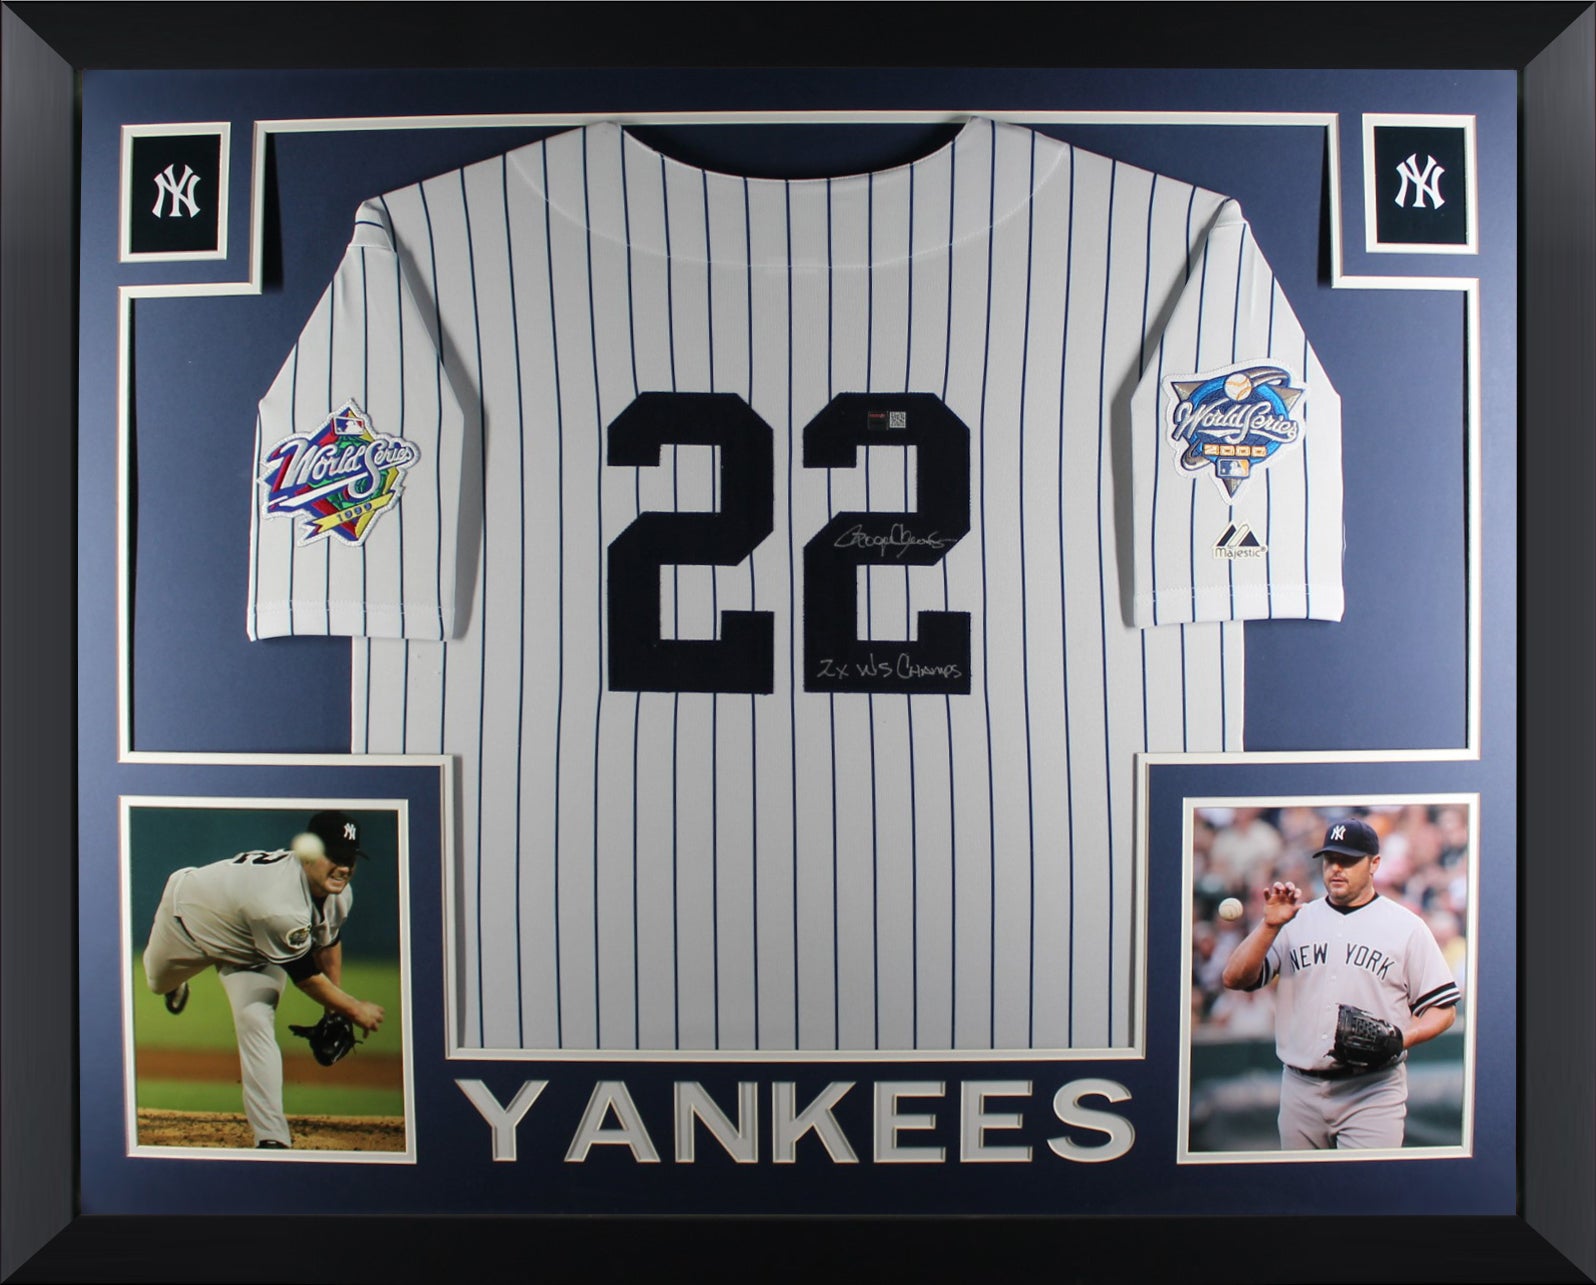 Roger Clemens Autographed New York Yankees Signed Majestic Baseball Framed Jersey 2 x World Series Champs TRISTAR COA-Powers Sports Memorabilia